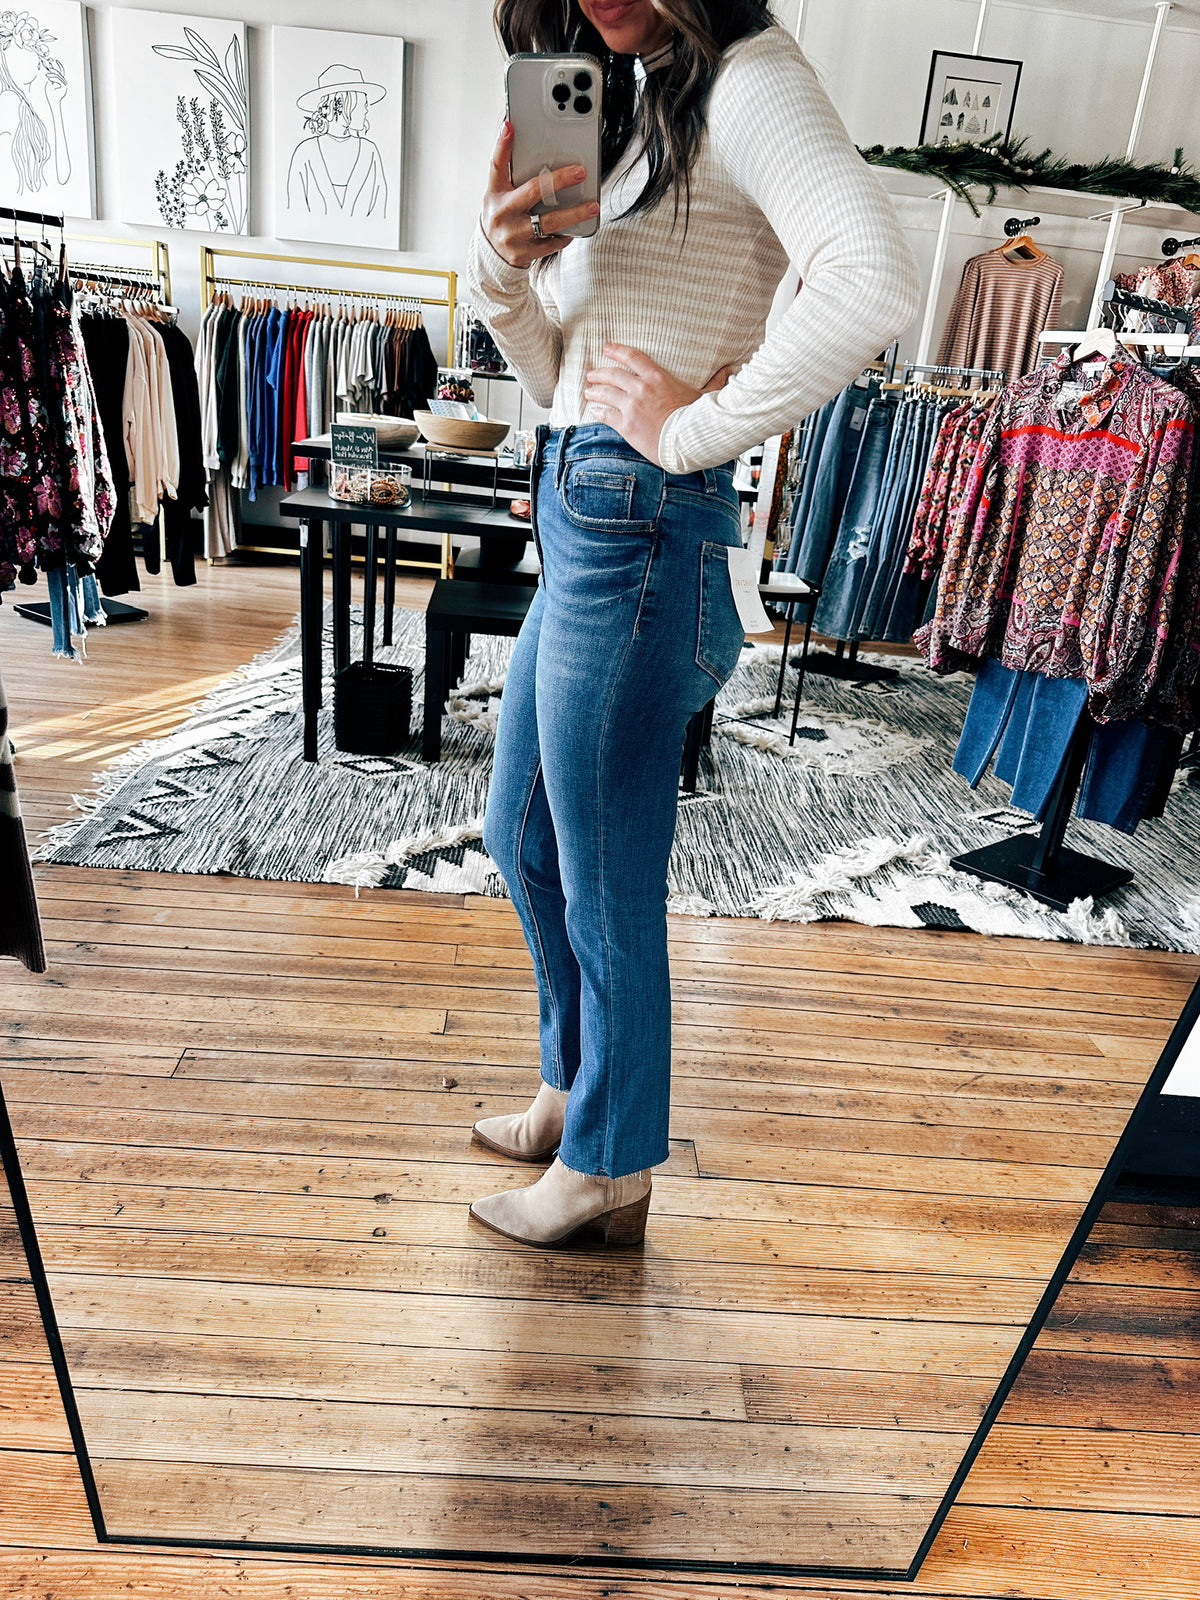 Master High Rise Slim Jeans-BottomsWomen's Master High Rise Slim Jeans | VerClare Boutique | Chenoa, IL-Women's Master High Rise Slim Jeans! They fit true to size, are a high rise and are an ankle length. Fabric Content: 69% Cotton, 16% Polyester, 9% Rayon, 6% Lycra. Located in Chenoa, Illinois about 20 minutes outside of Bloomington & Normal, IL in McLean County. Free Shipping on eligible Orders. Shop Pay Accepted-VerClare Boutique